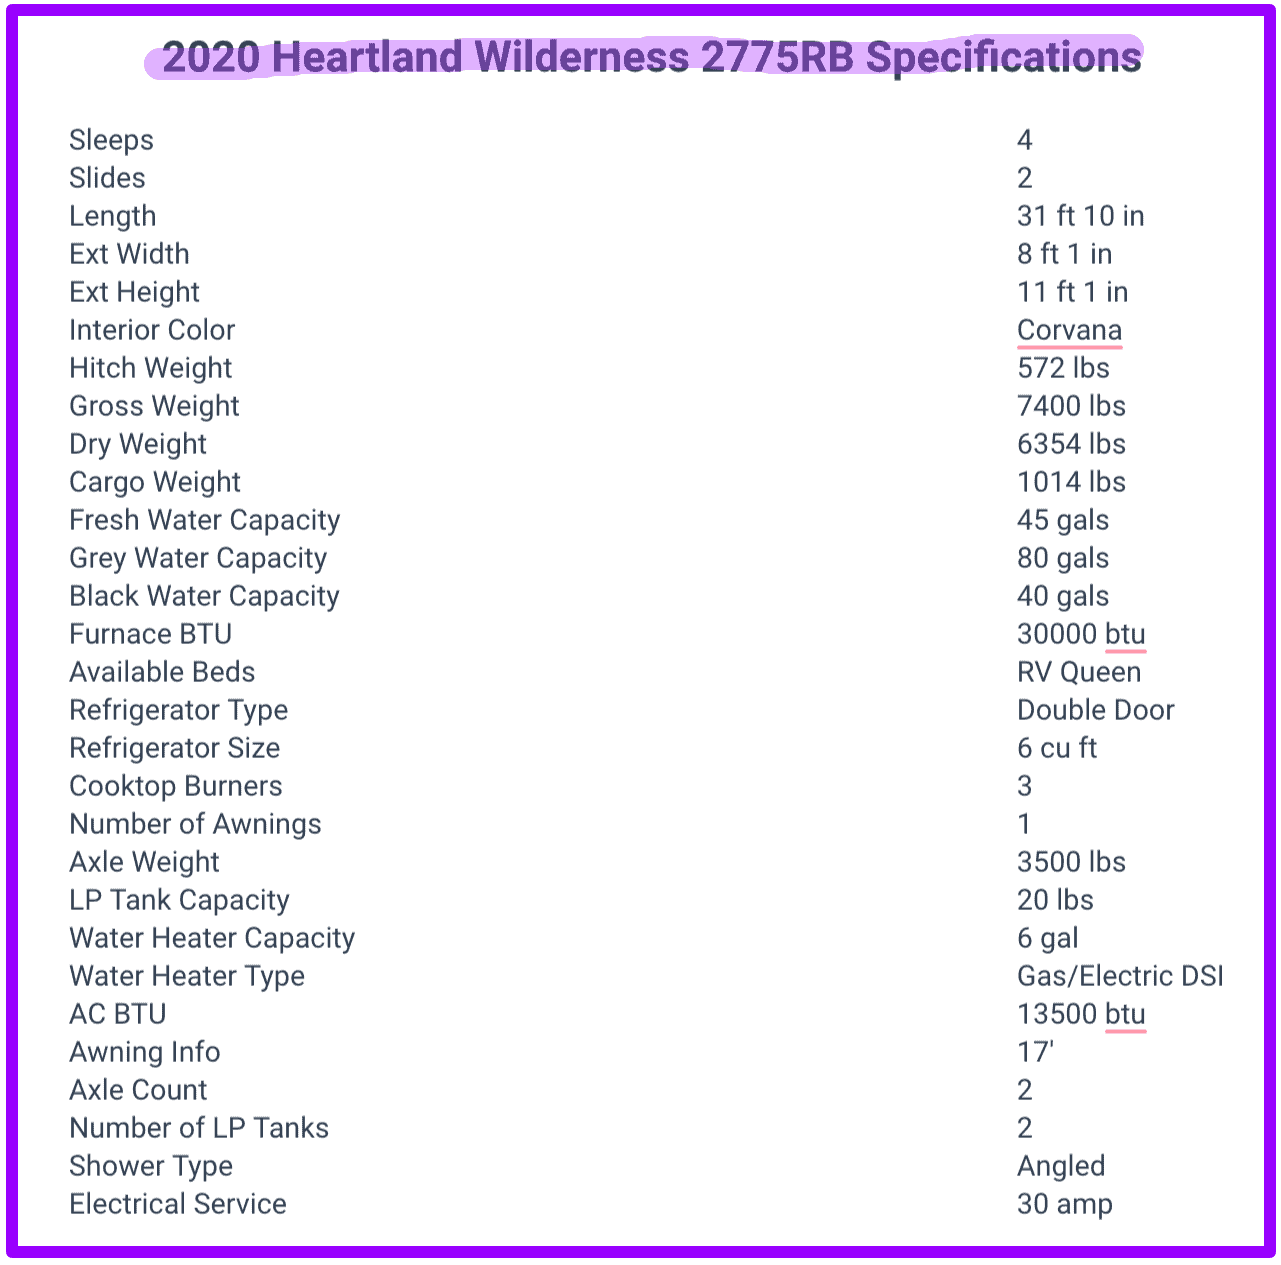 2020 Heartland Wilderness 2775RB specifications